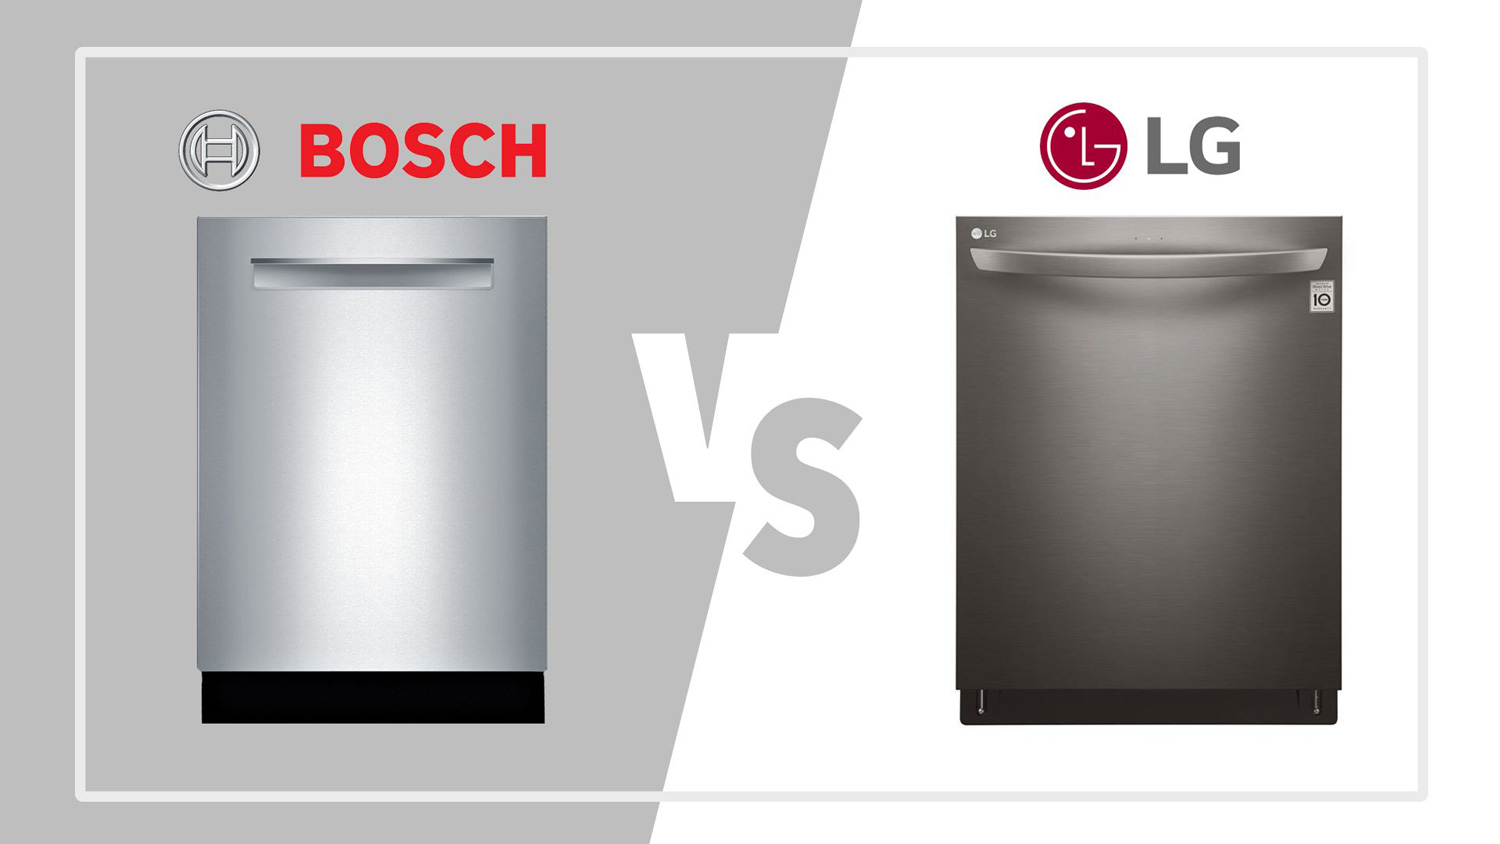 LG Vs Bosch Dishwasher How Do They Compare?